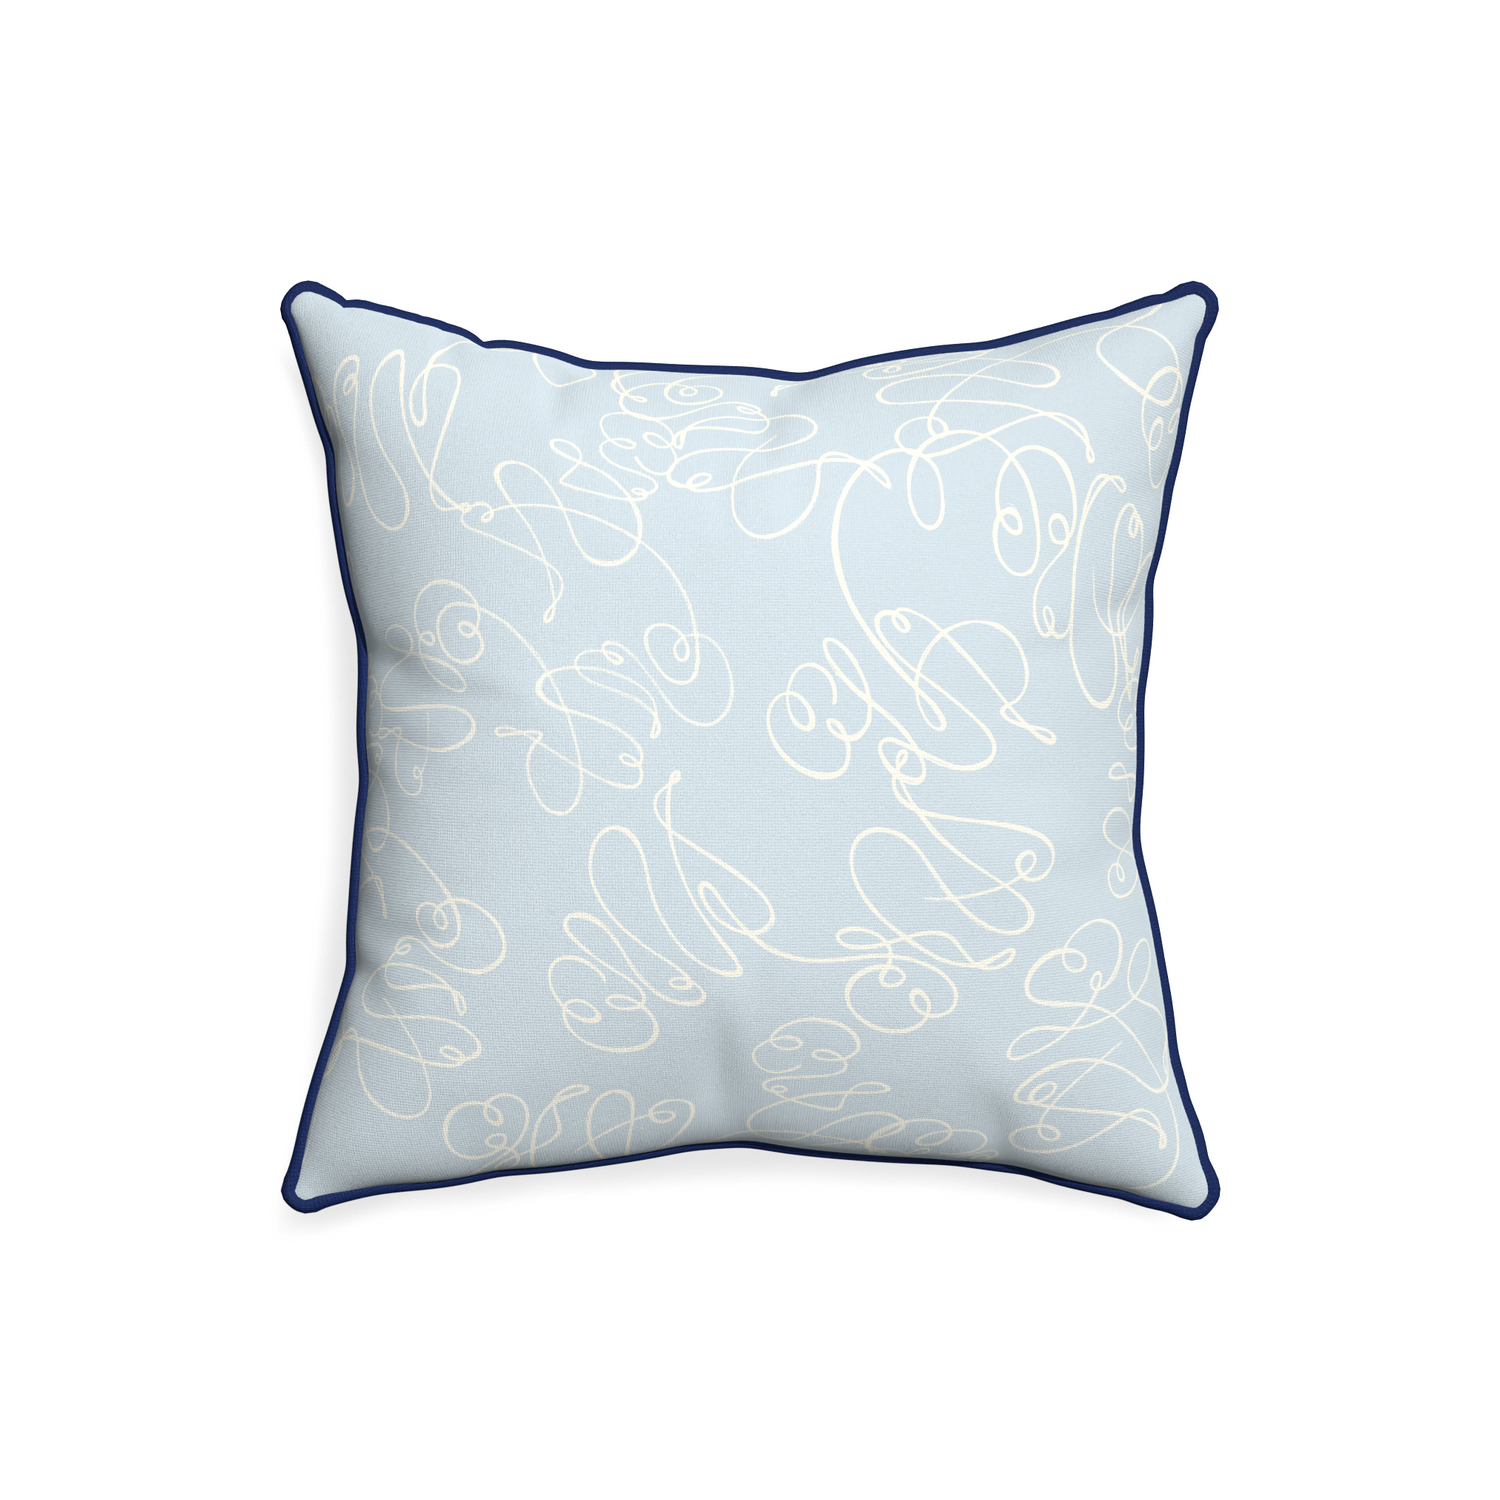 20-square mirabella custom powder blue abstractpillow with midnight piping on white background